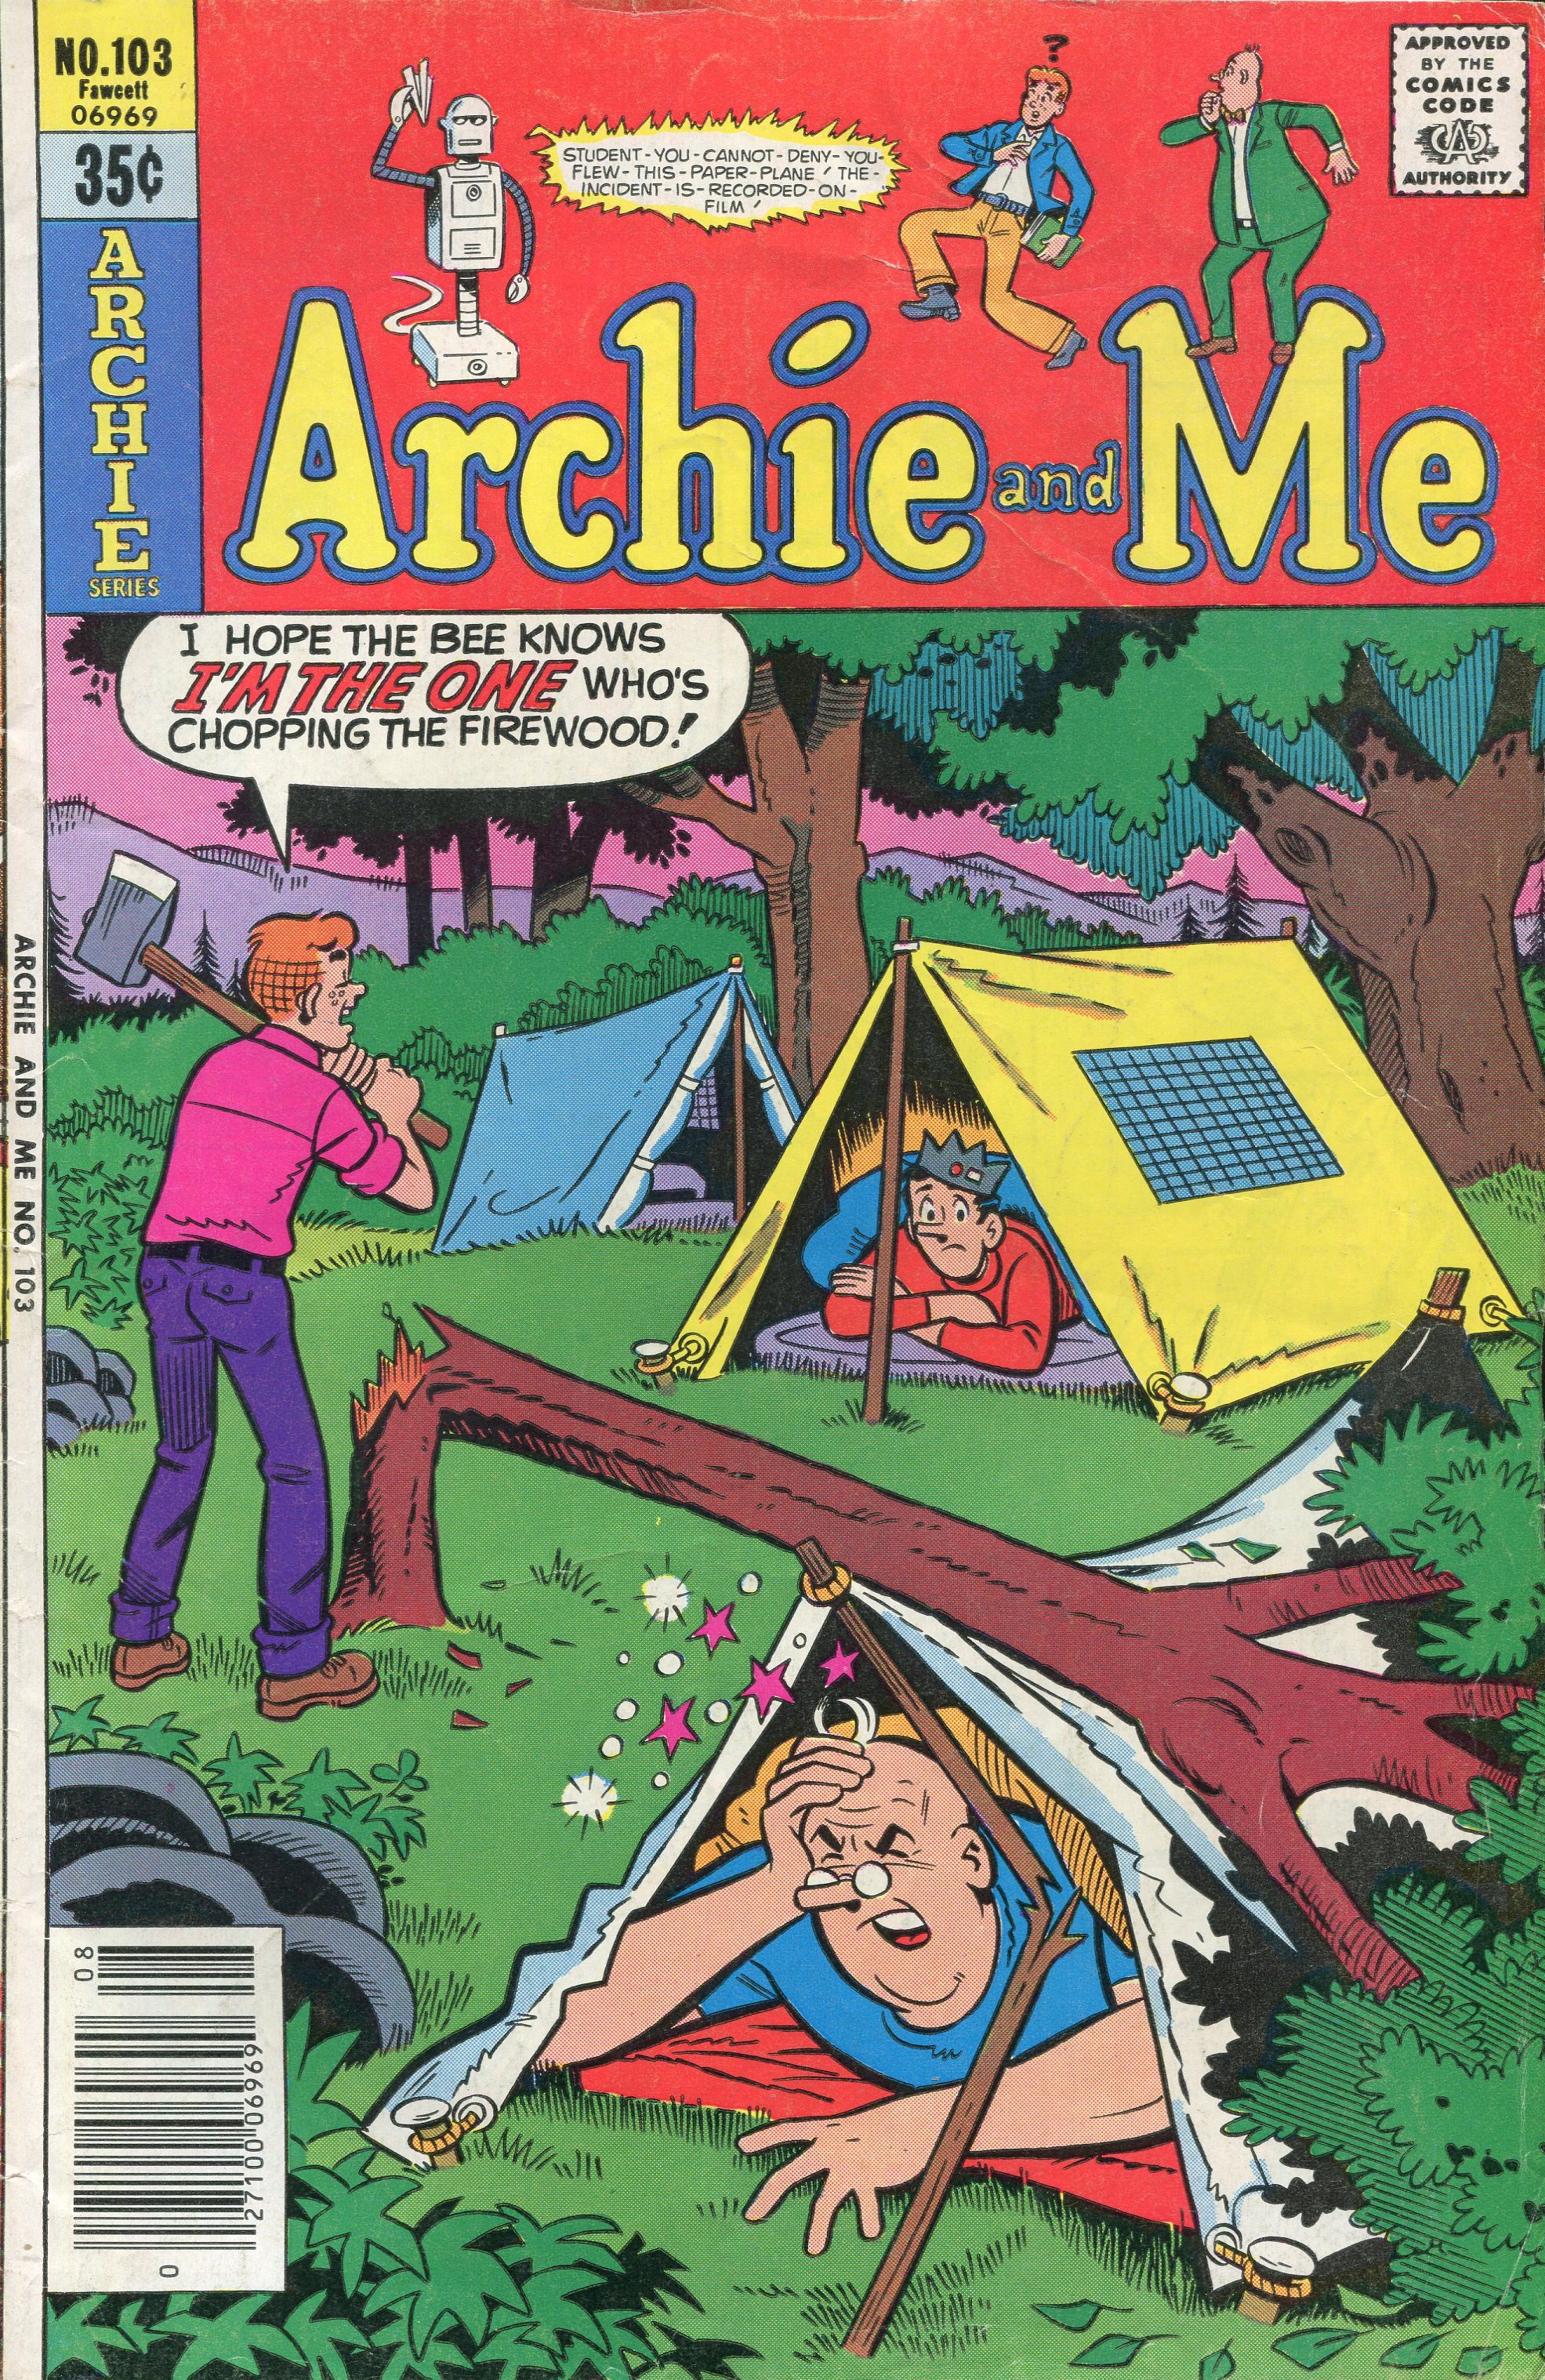 Read online Archie and Me comic -  Issue #103 - 1